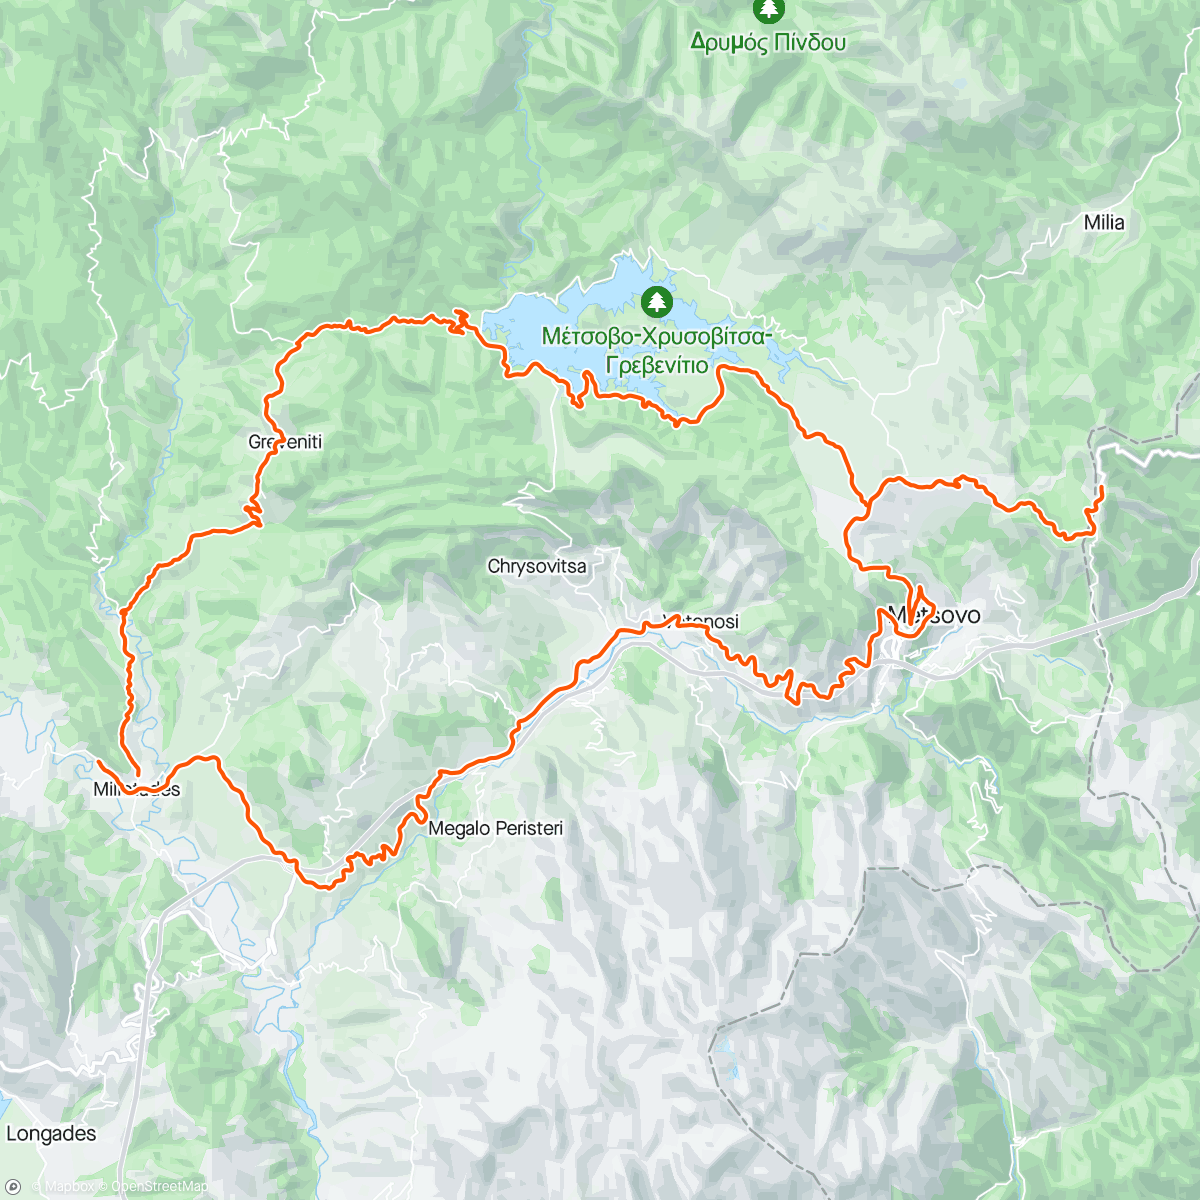 Map of the activity, 🇬🇷💙ExpLorinG EAST ZAGORI and met a lot of friendLy dogs💙🇬🇷